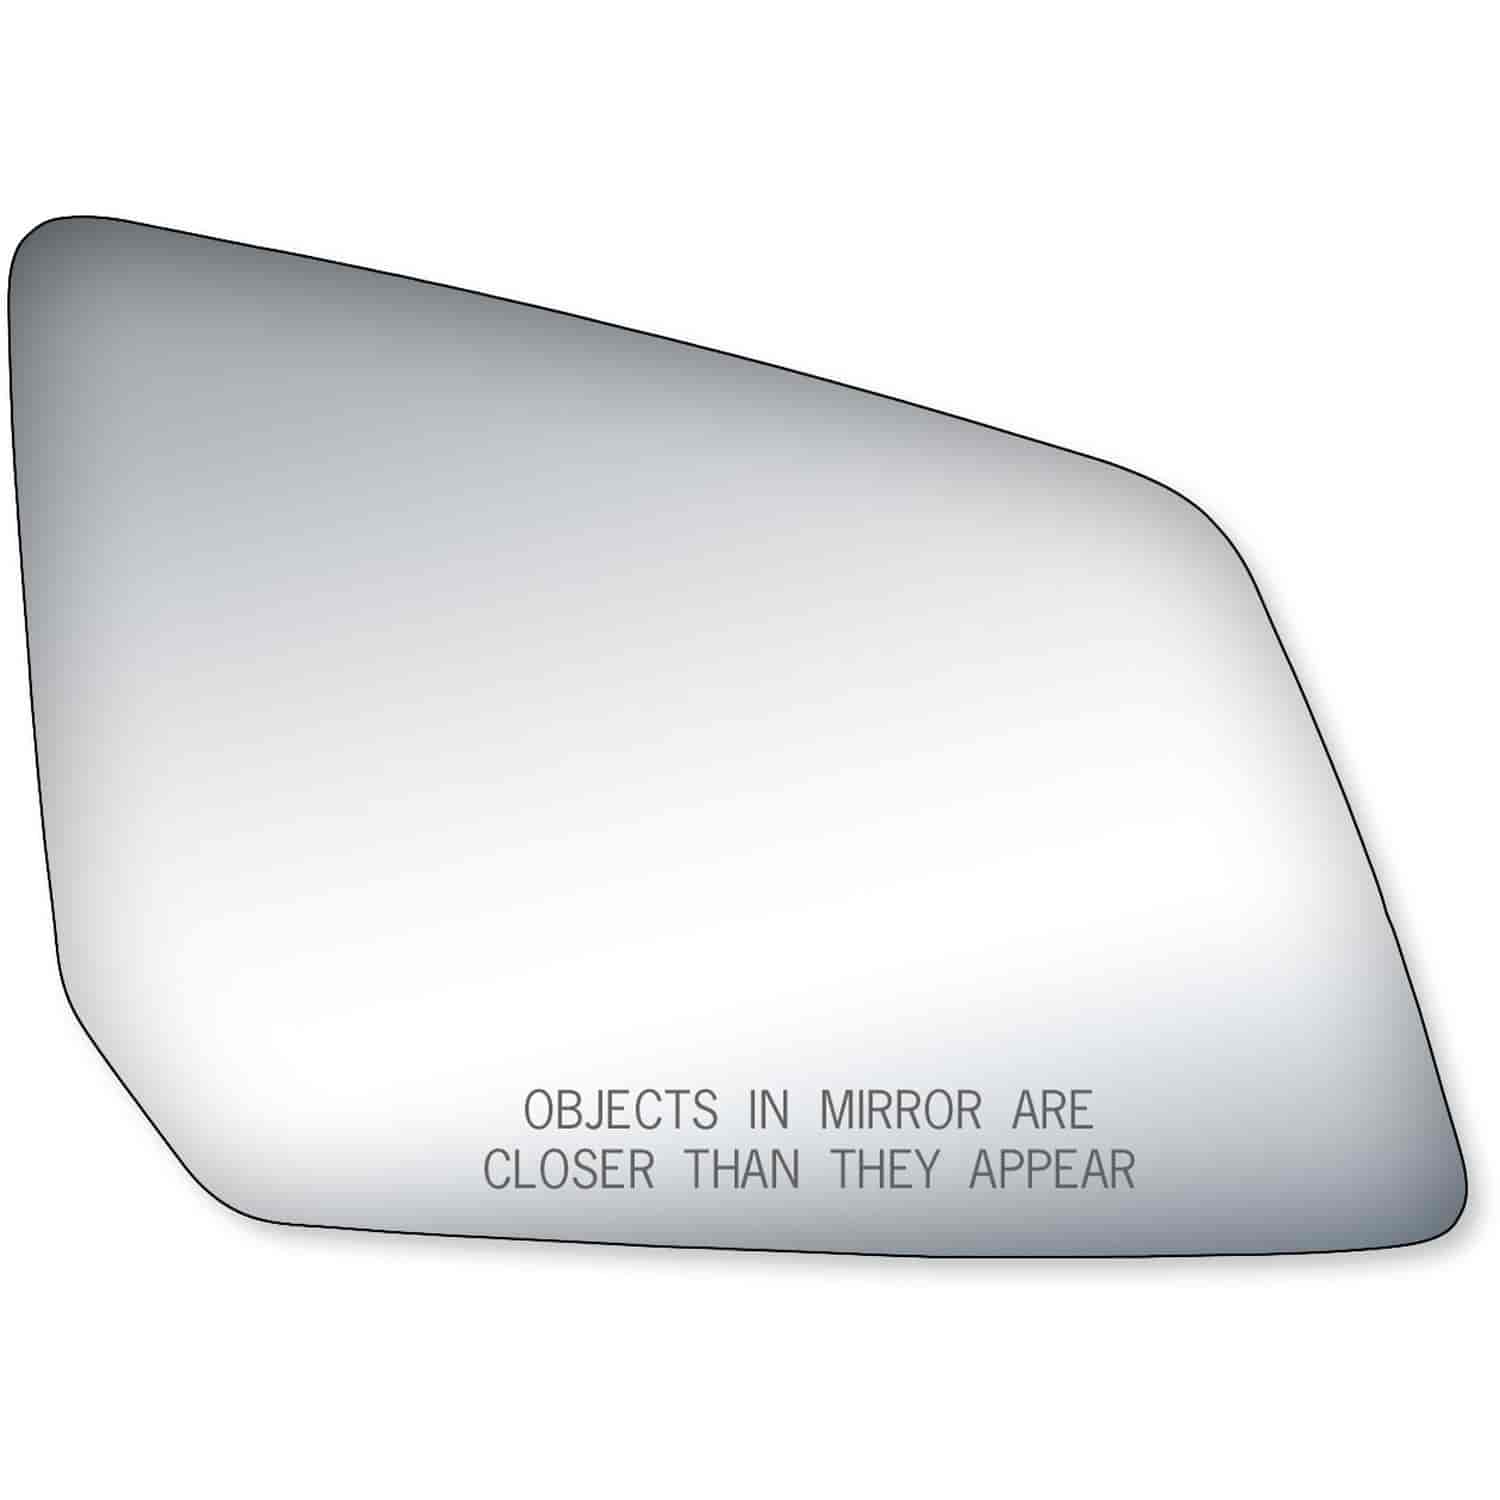 Replacement Glass for 09-14 Traverse w/out blind spot